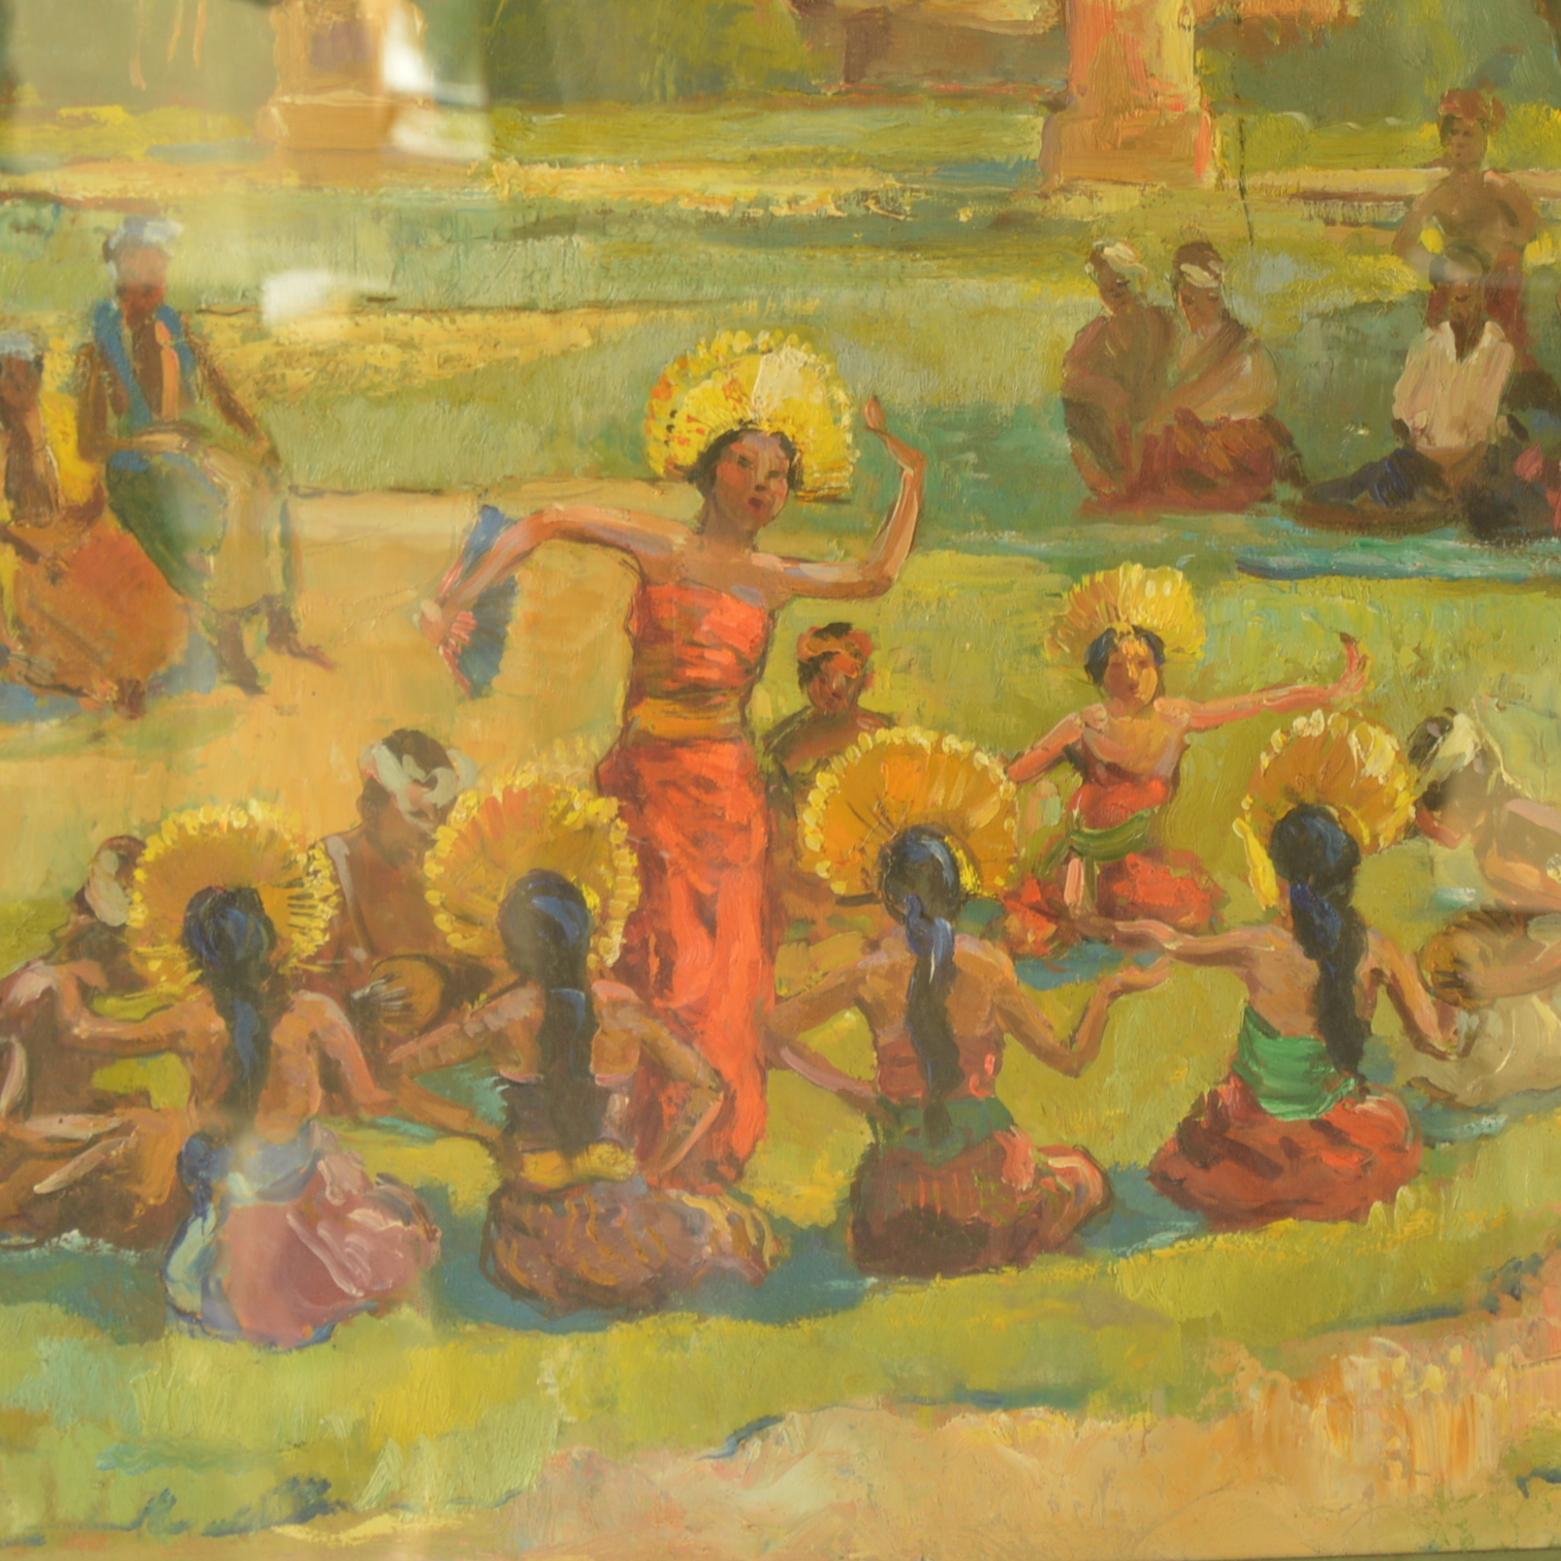 Pier Antonio Gariazzo (1879-1963)
Painting Balinese dance.
Signed and dated 1938 lower right.
Oil on panel.
 